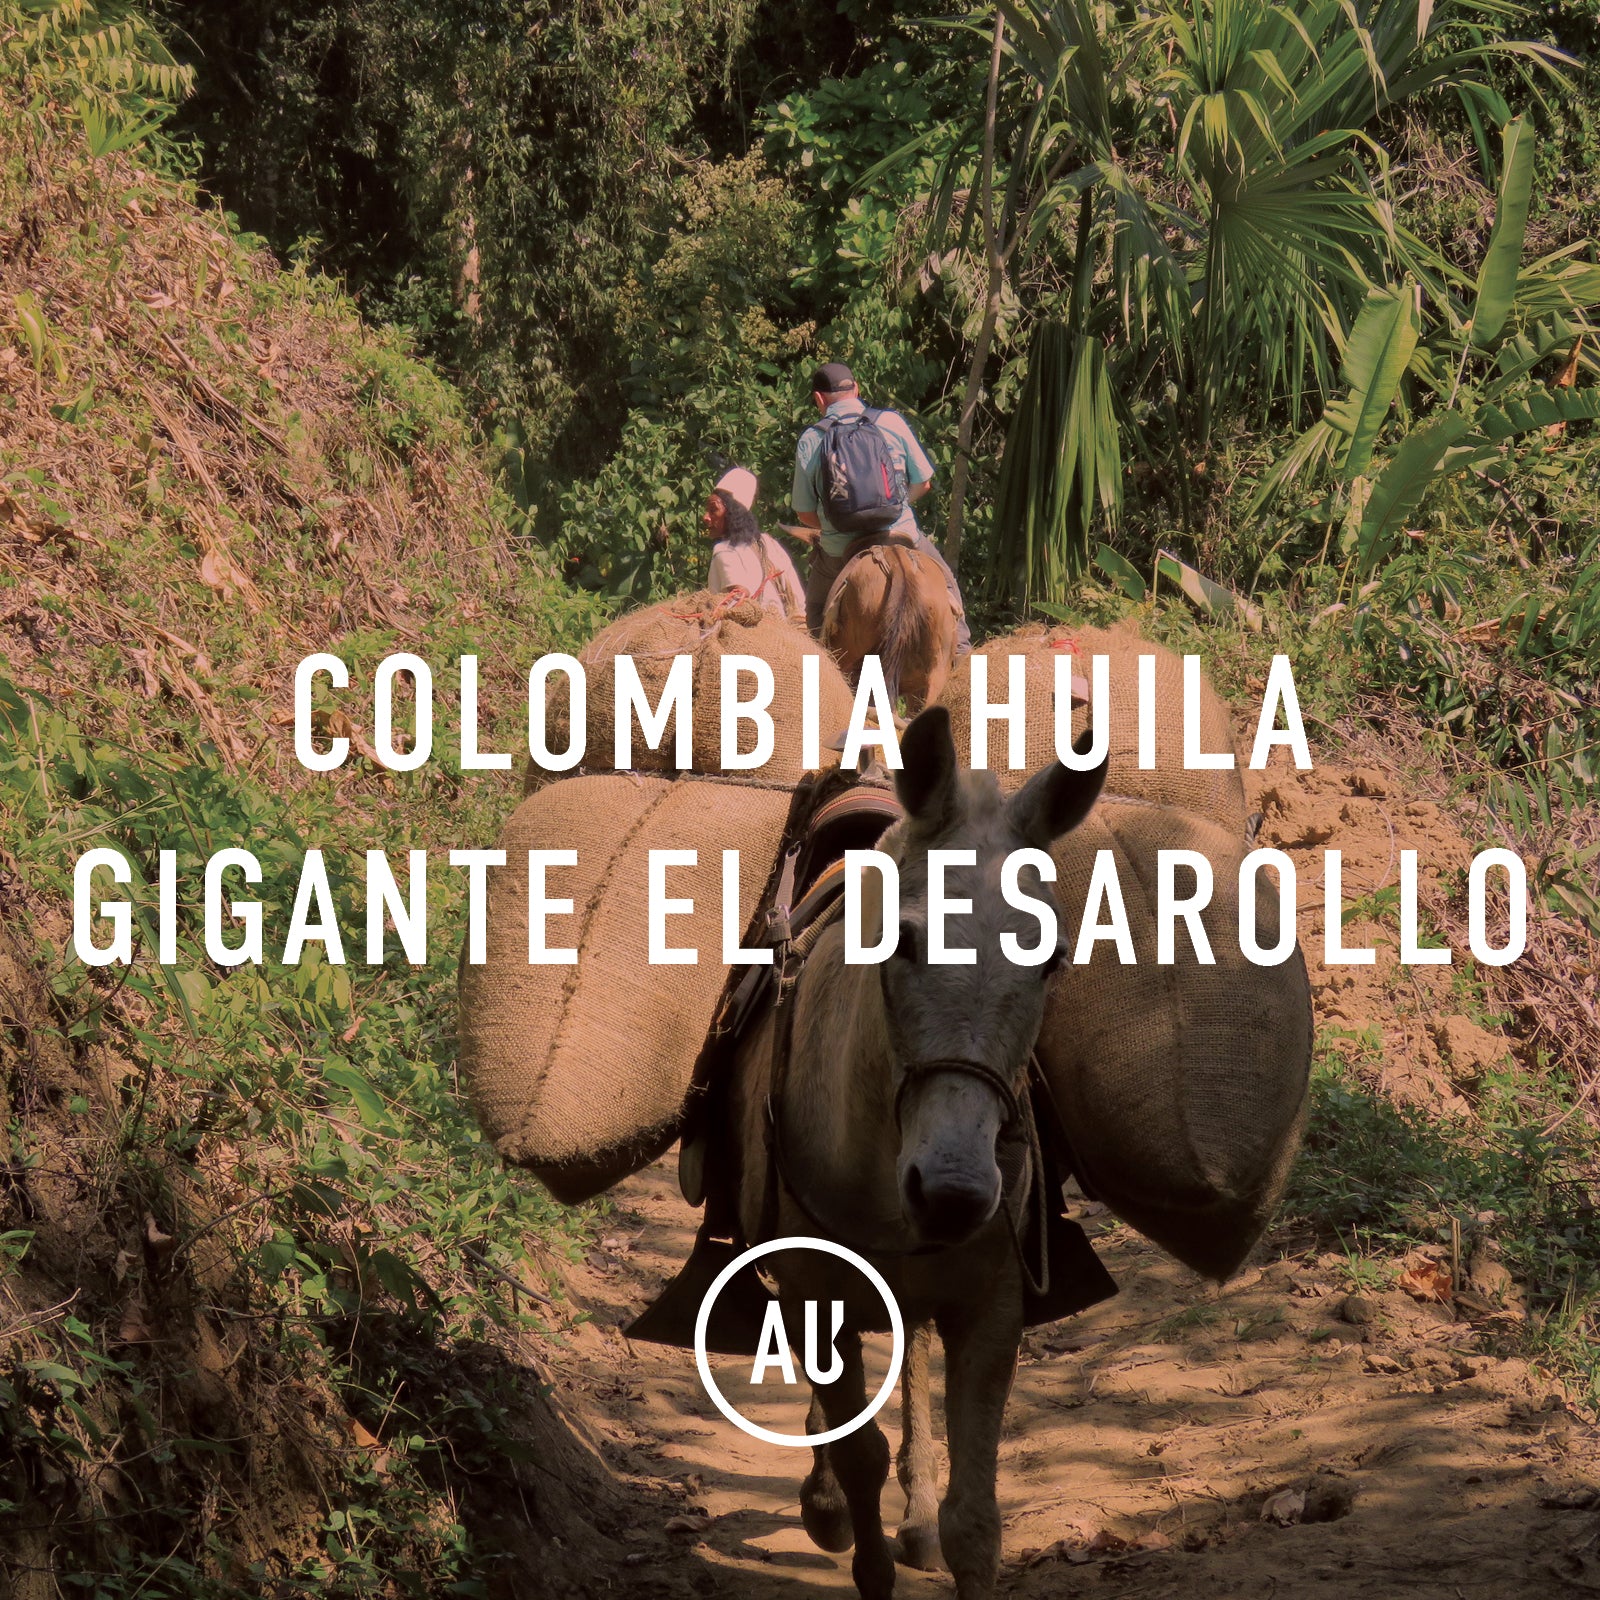 Giant Colombia